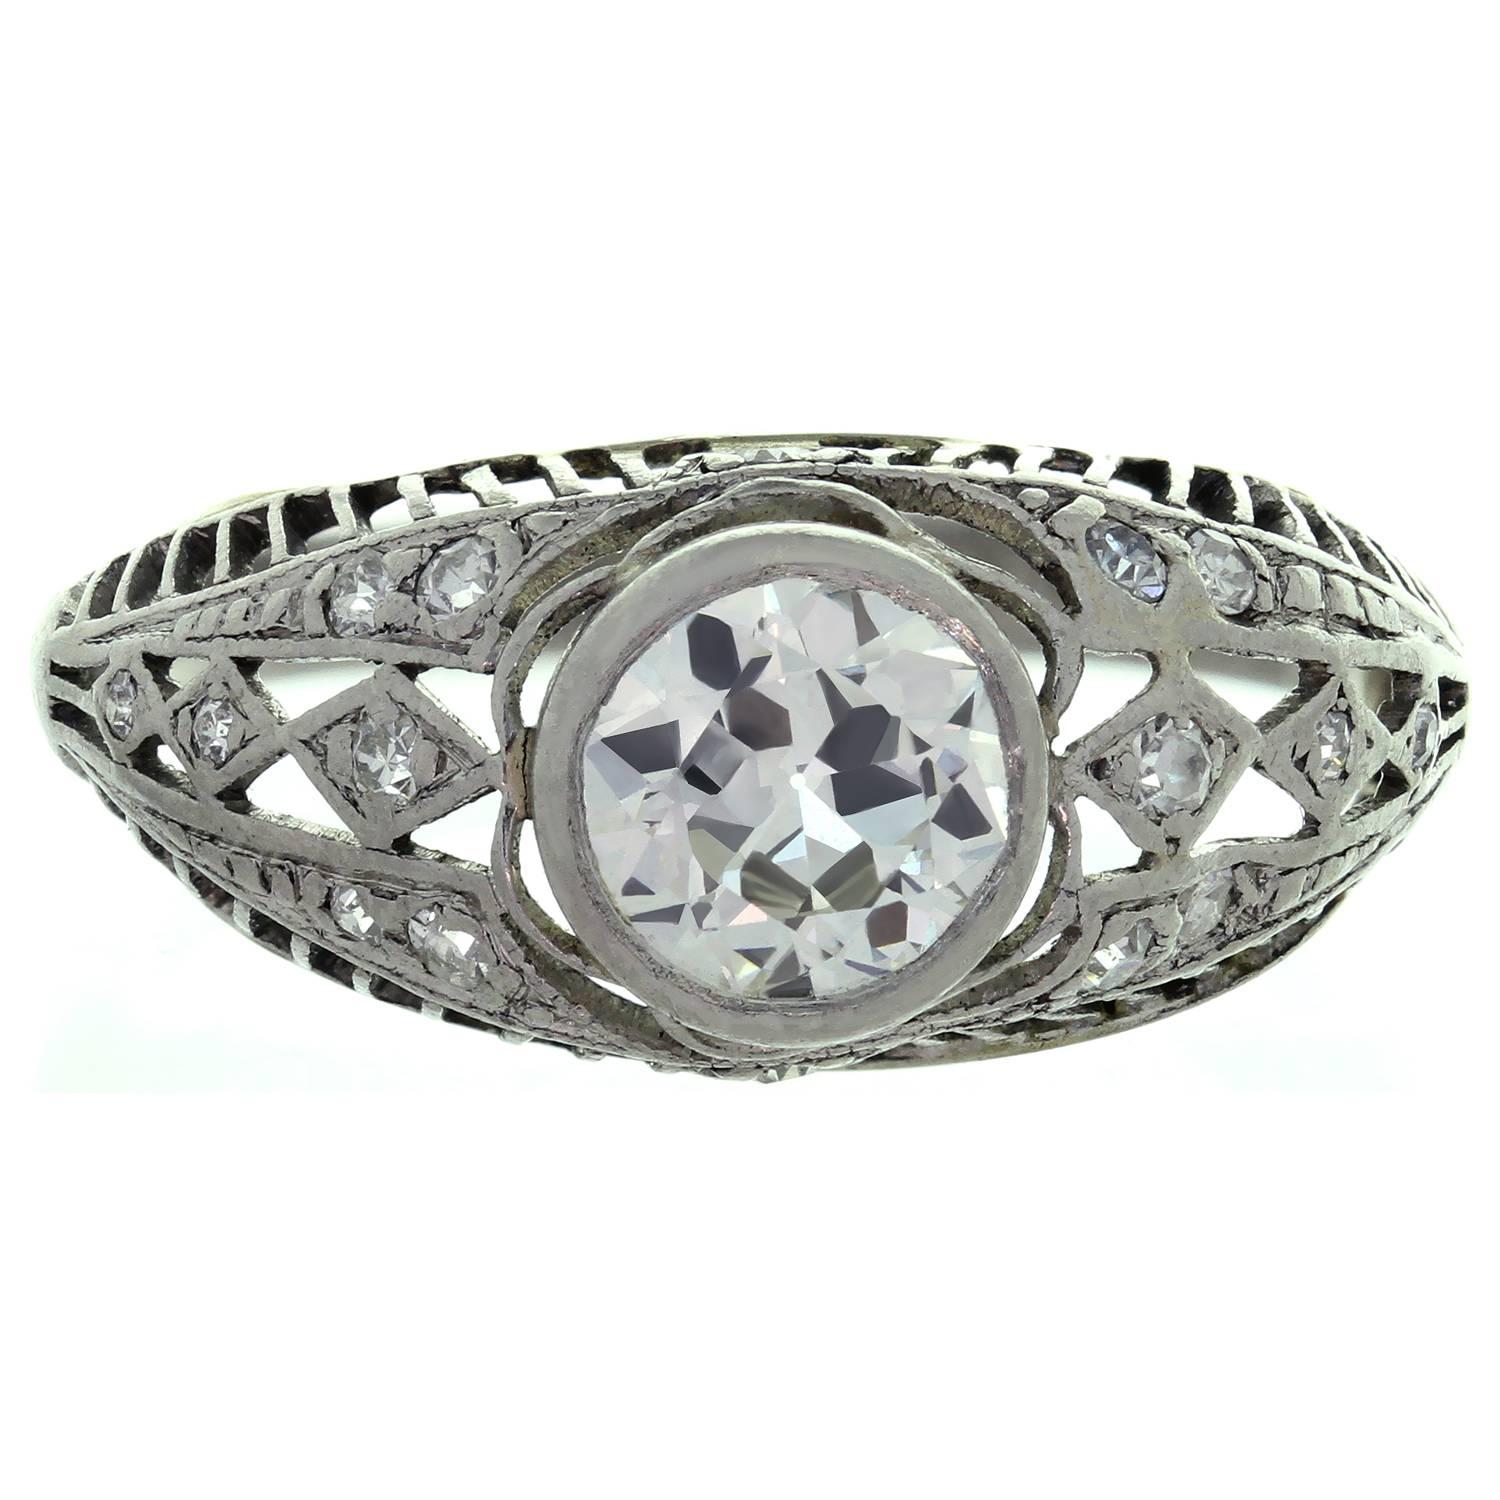 This splendid antique engagement ring features a classic filigree design crafted in platinum and accented with a sparkling European-cut VS clarity H-I color central diamond of an estimated 0.72-0.75, surrounded with 16 single-cut diamonds of an